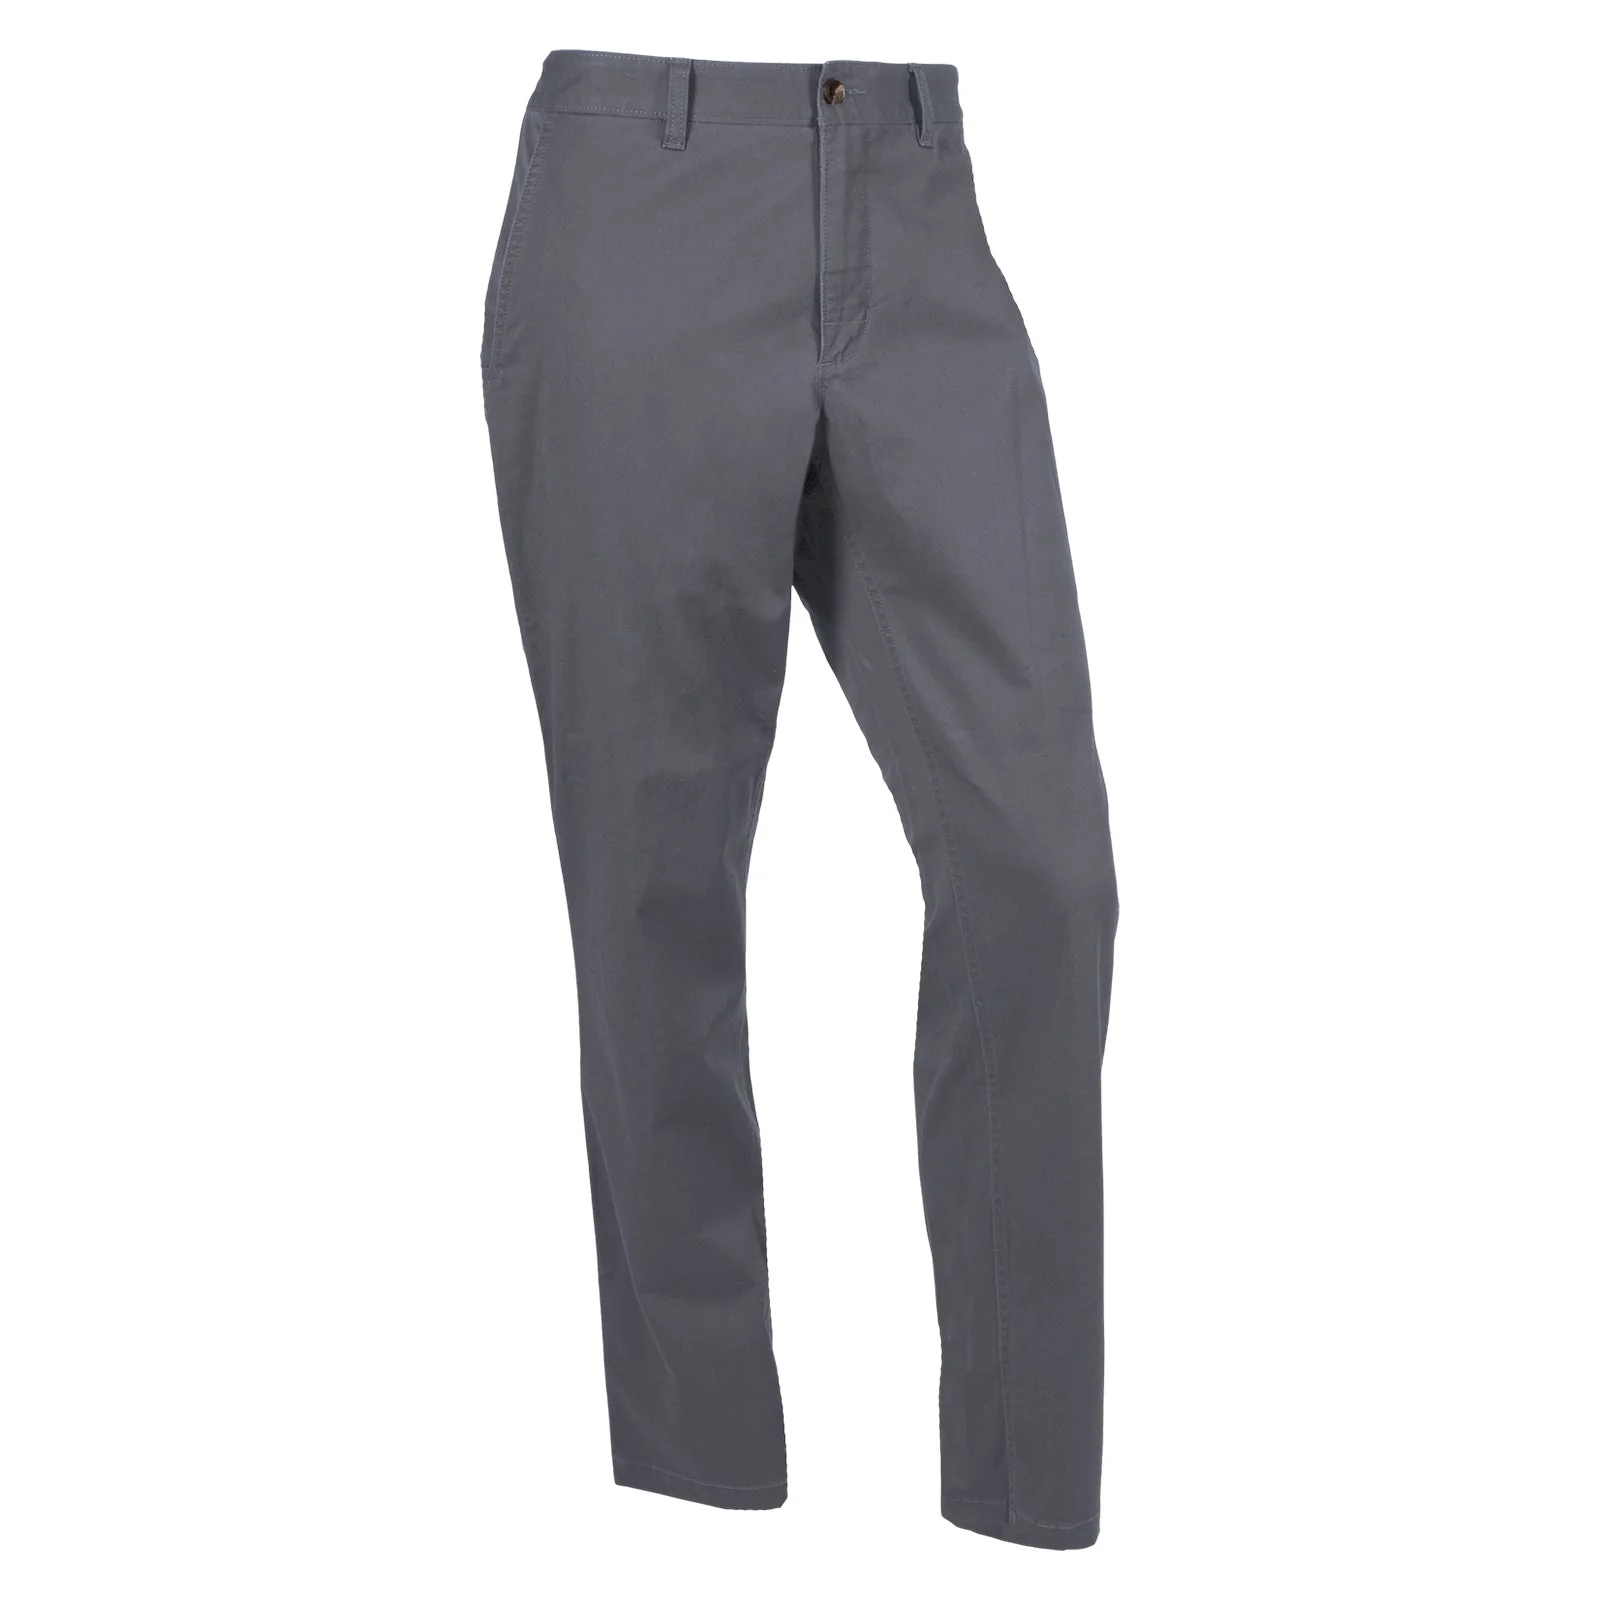 Homestead Chino Pants Modern Fit - Rivers & Glen Trading Co.